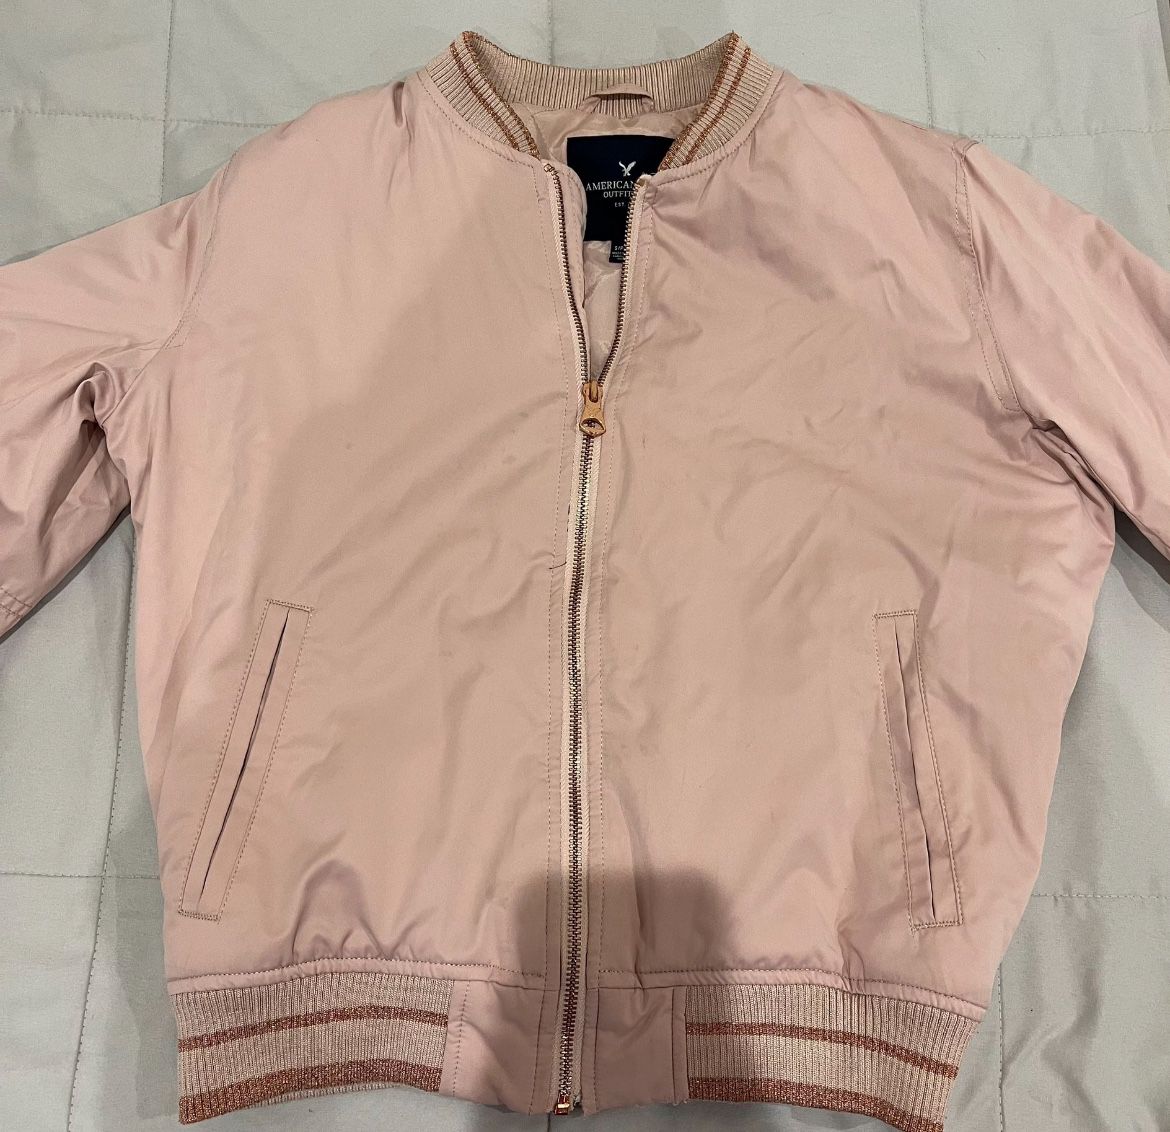 American Eagle Pink Bomber Jacket - Size S